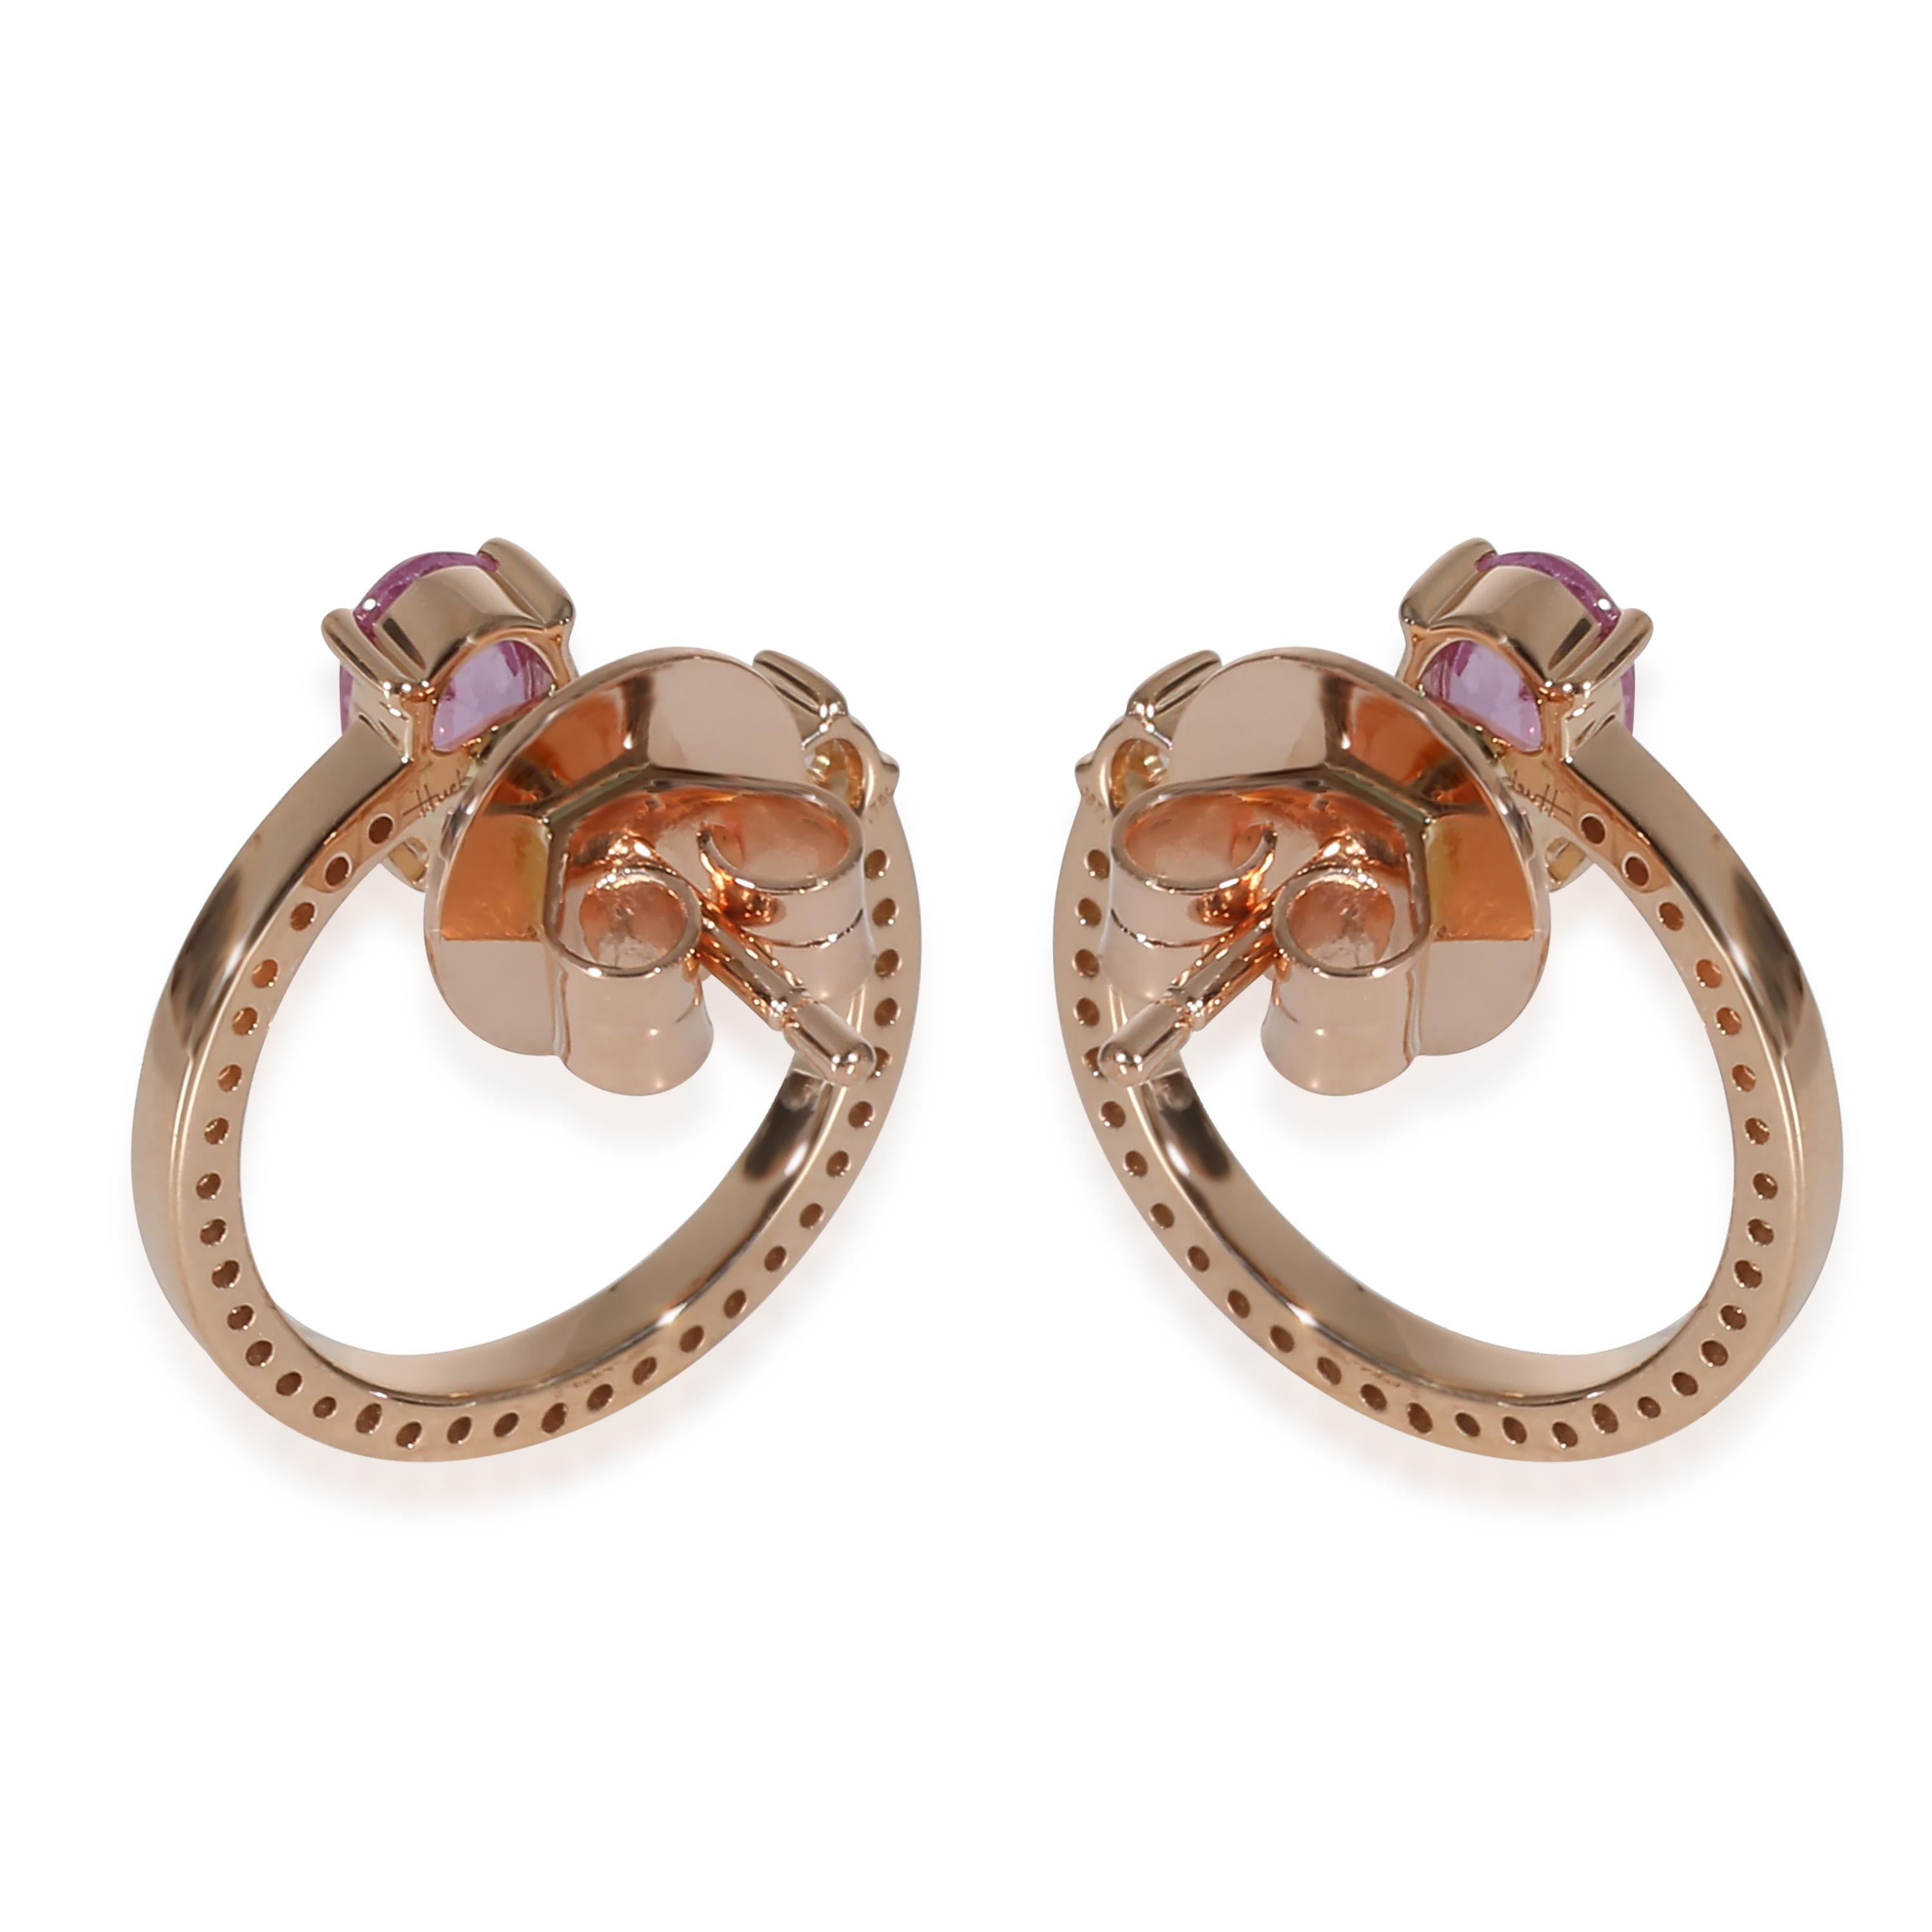 HUEB Spectrum Pink Sapphire & Diamond Earrings in 18k Rose Gold 0.39 CTW

PRIMARY DETAILS
SKU: 135453
Listing Title: HUEB Spectrum Pink Sapphire & Diamond Earrings in 18k Rose Gold 0.39 CTW
Condition Description: Retails for 2450 USD. In excellent